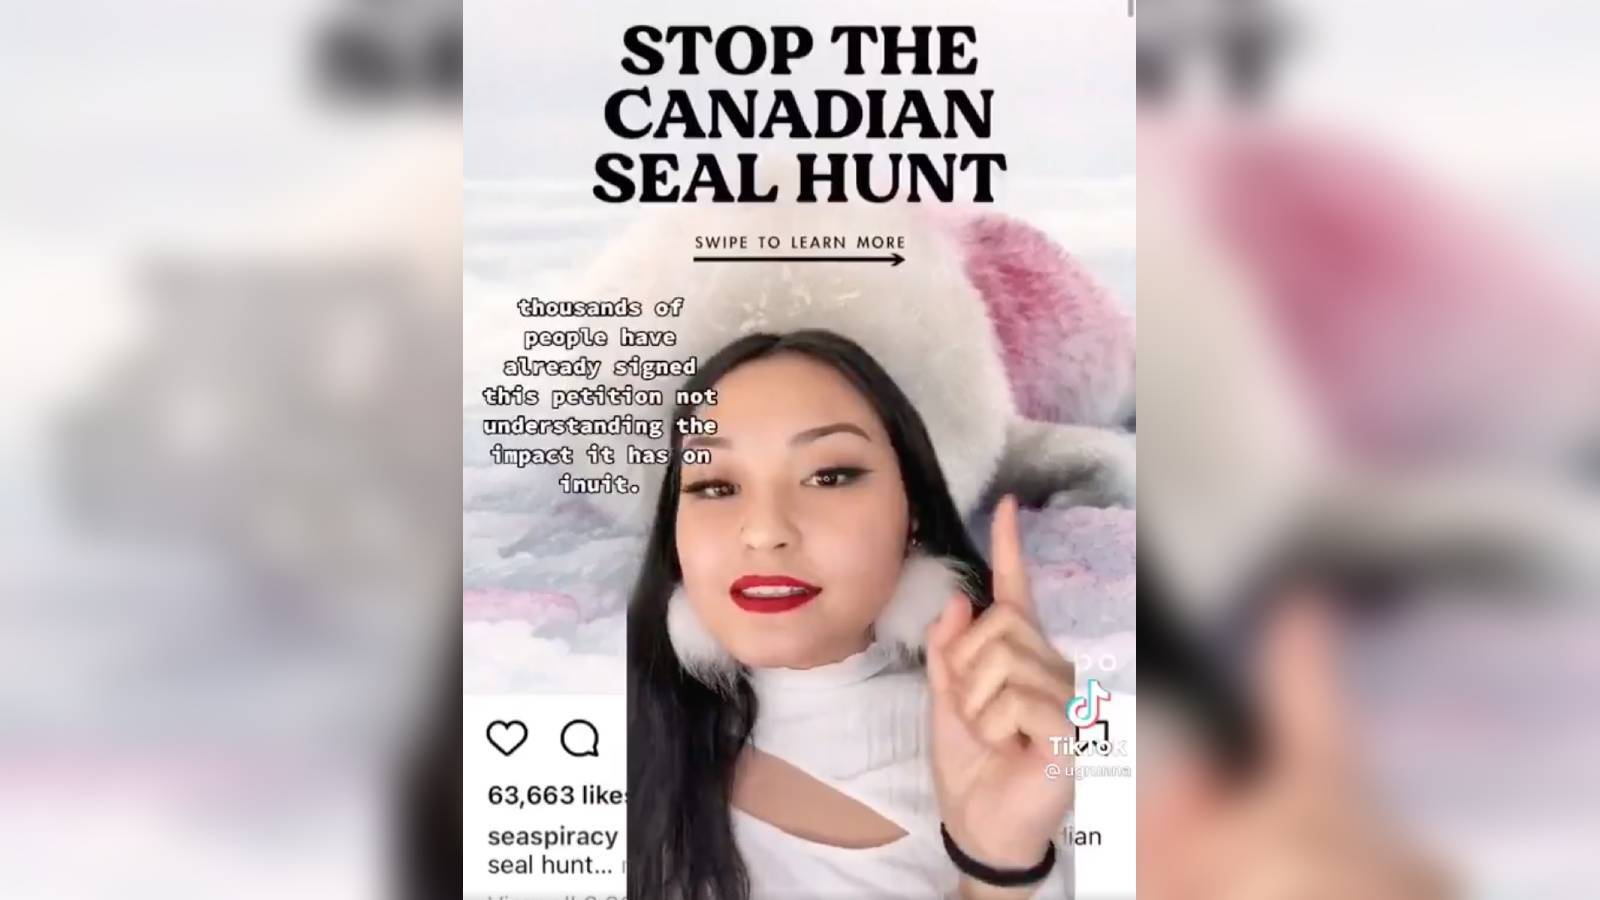 ‘Seaspiracy’ Criticized For Anti-Inuit Racism After Targeting Seal Hunt